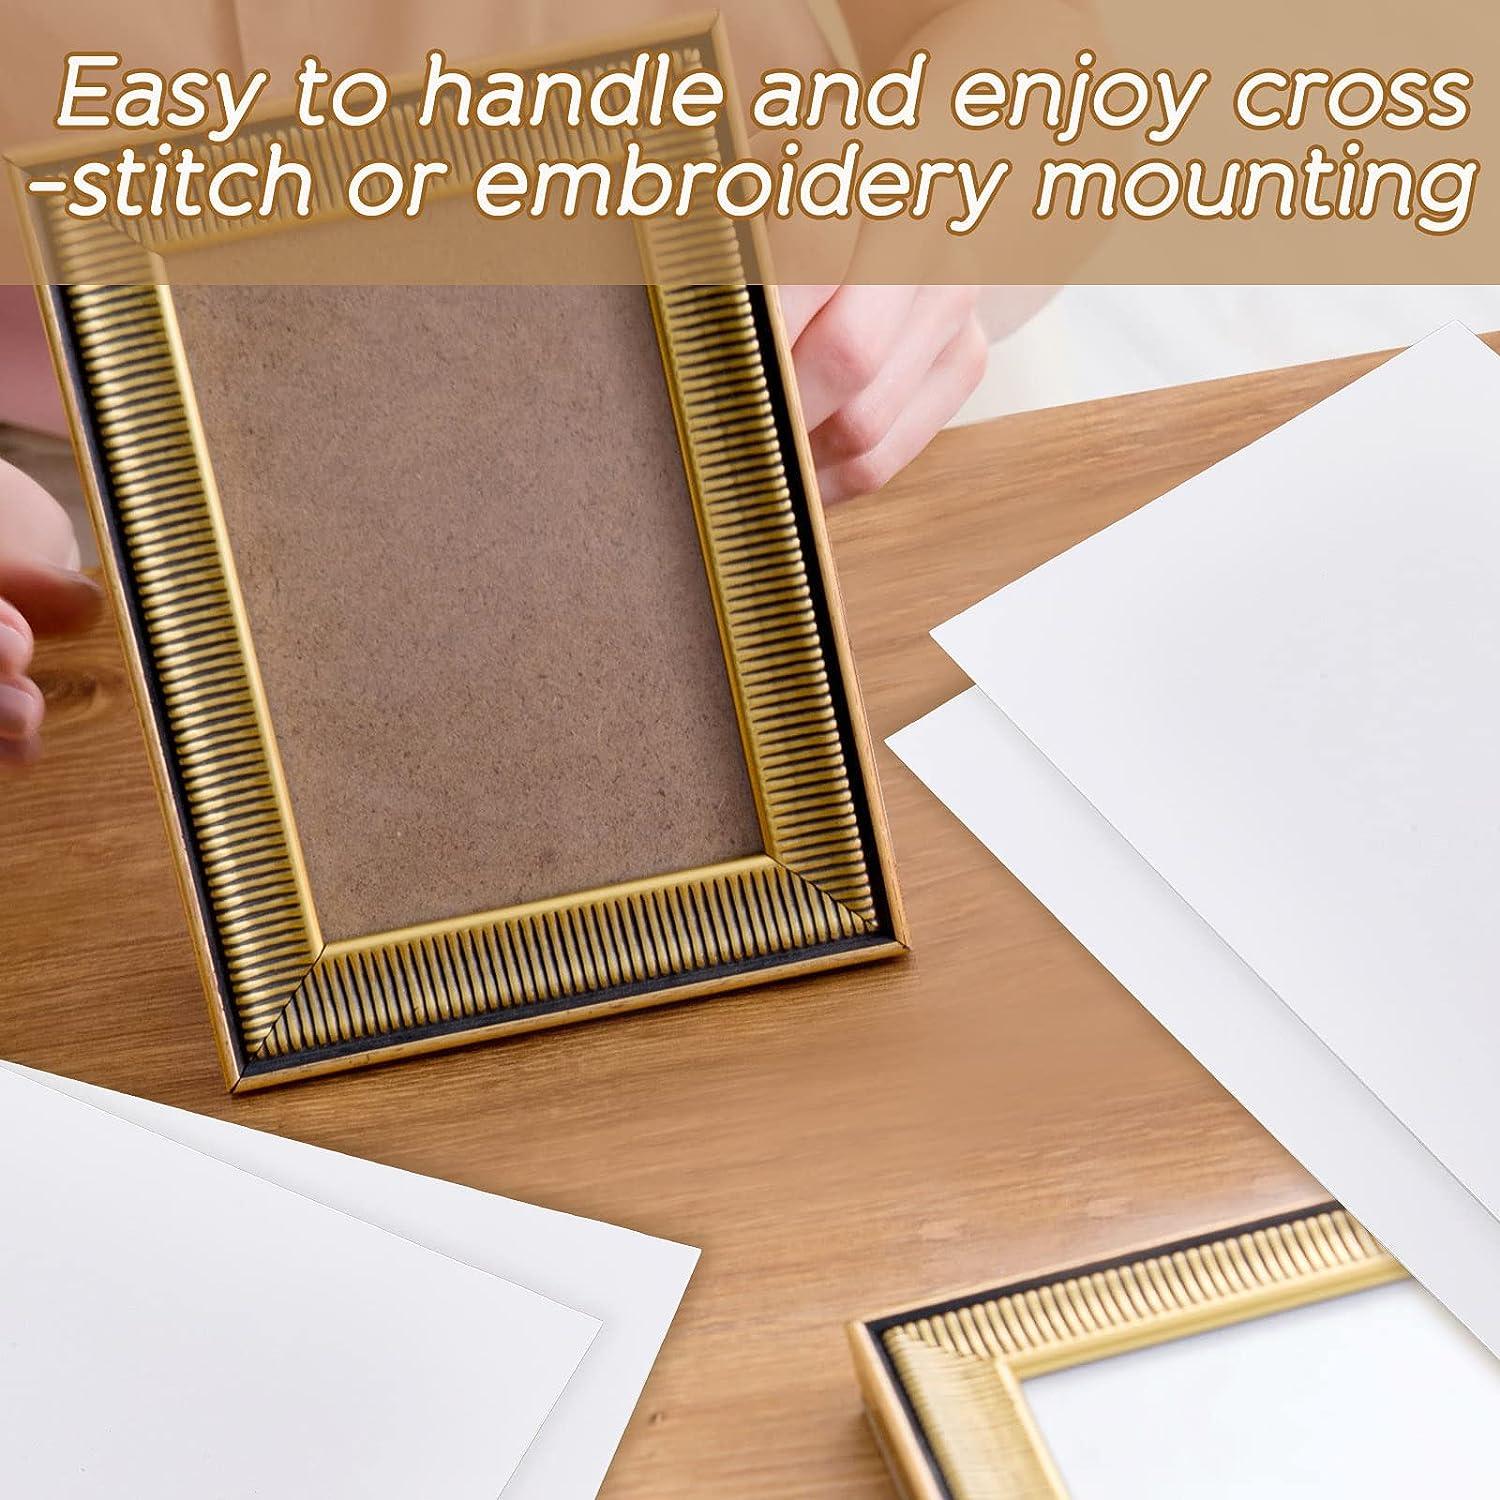 How to frame cross stitch and embroidery using sticky board